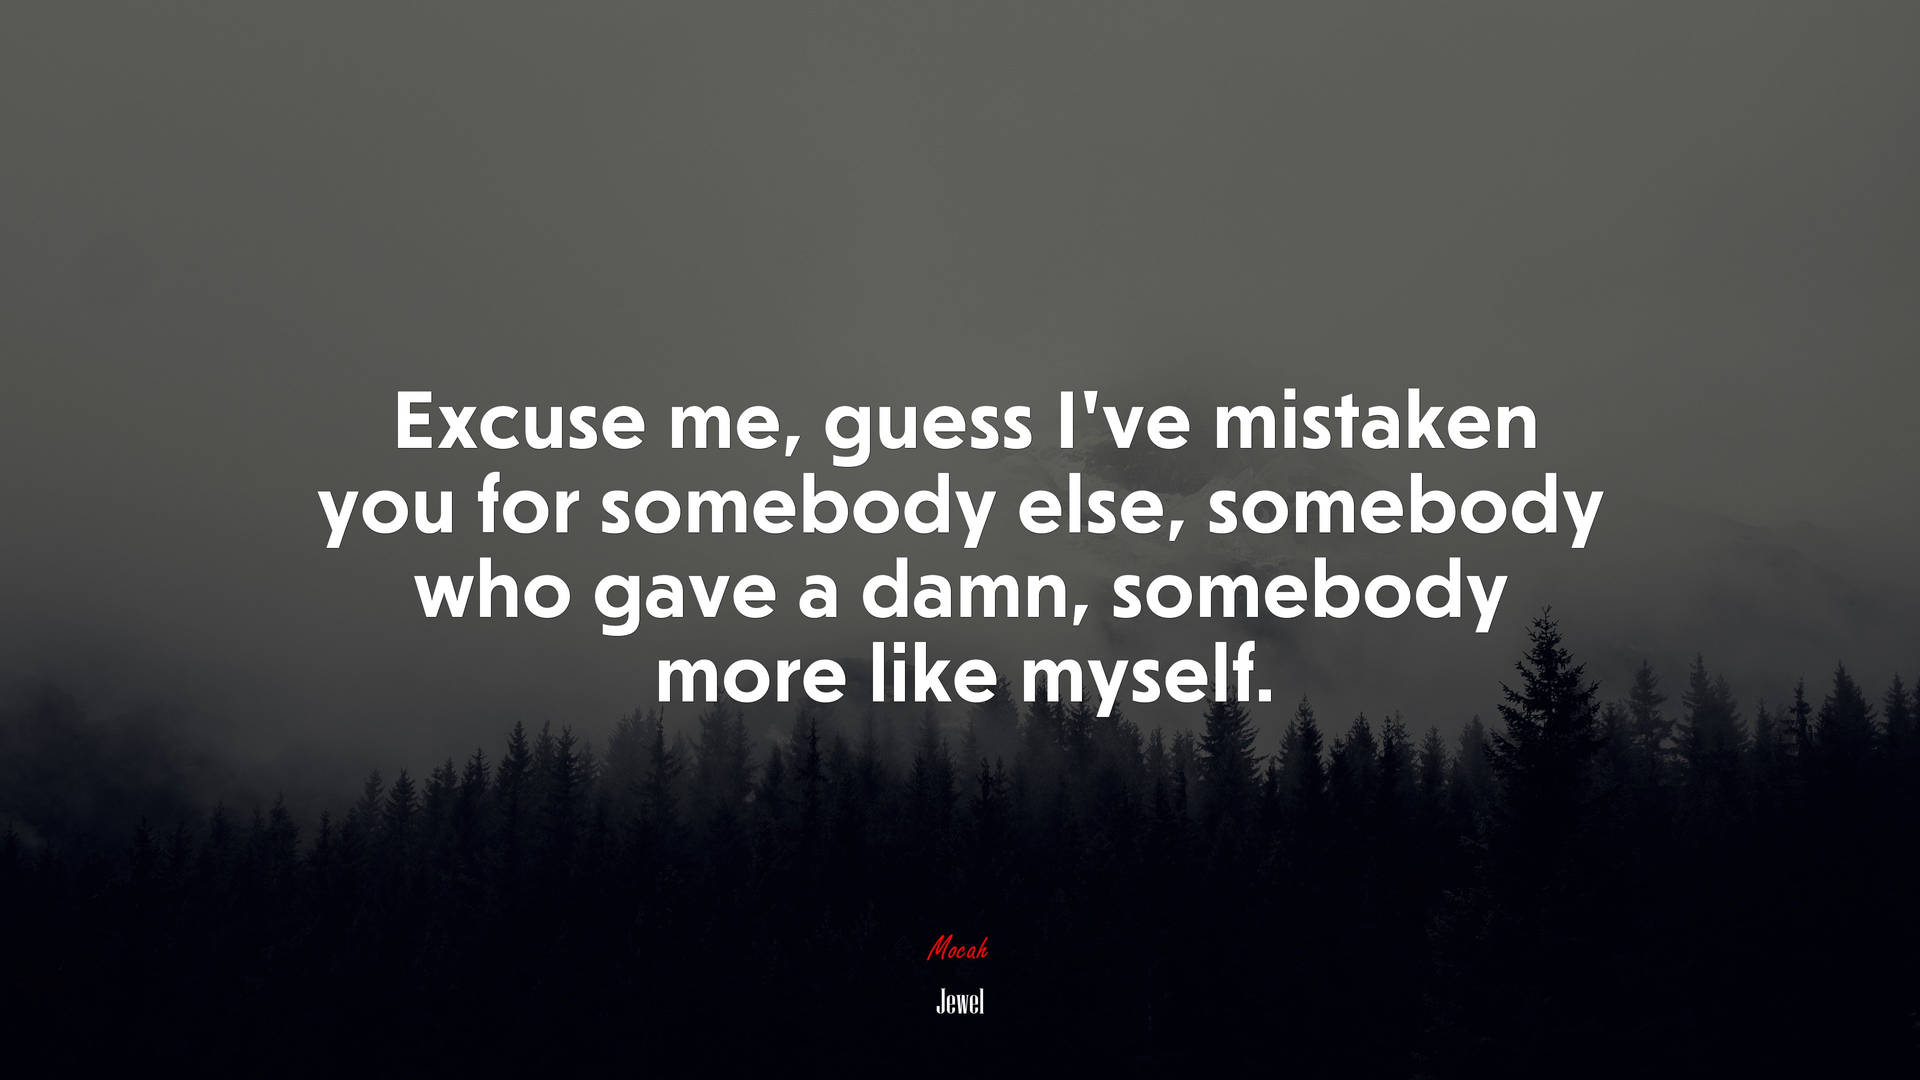 Caption: Emotional Expressions: "Excuse Me" and Expectation Sad Quote. Wallpaper